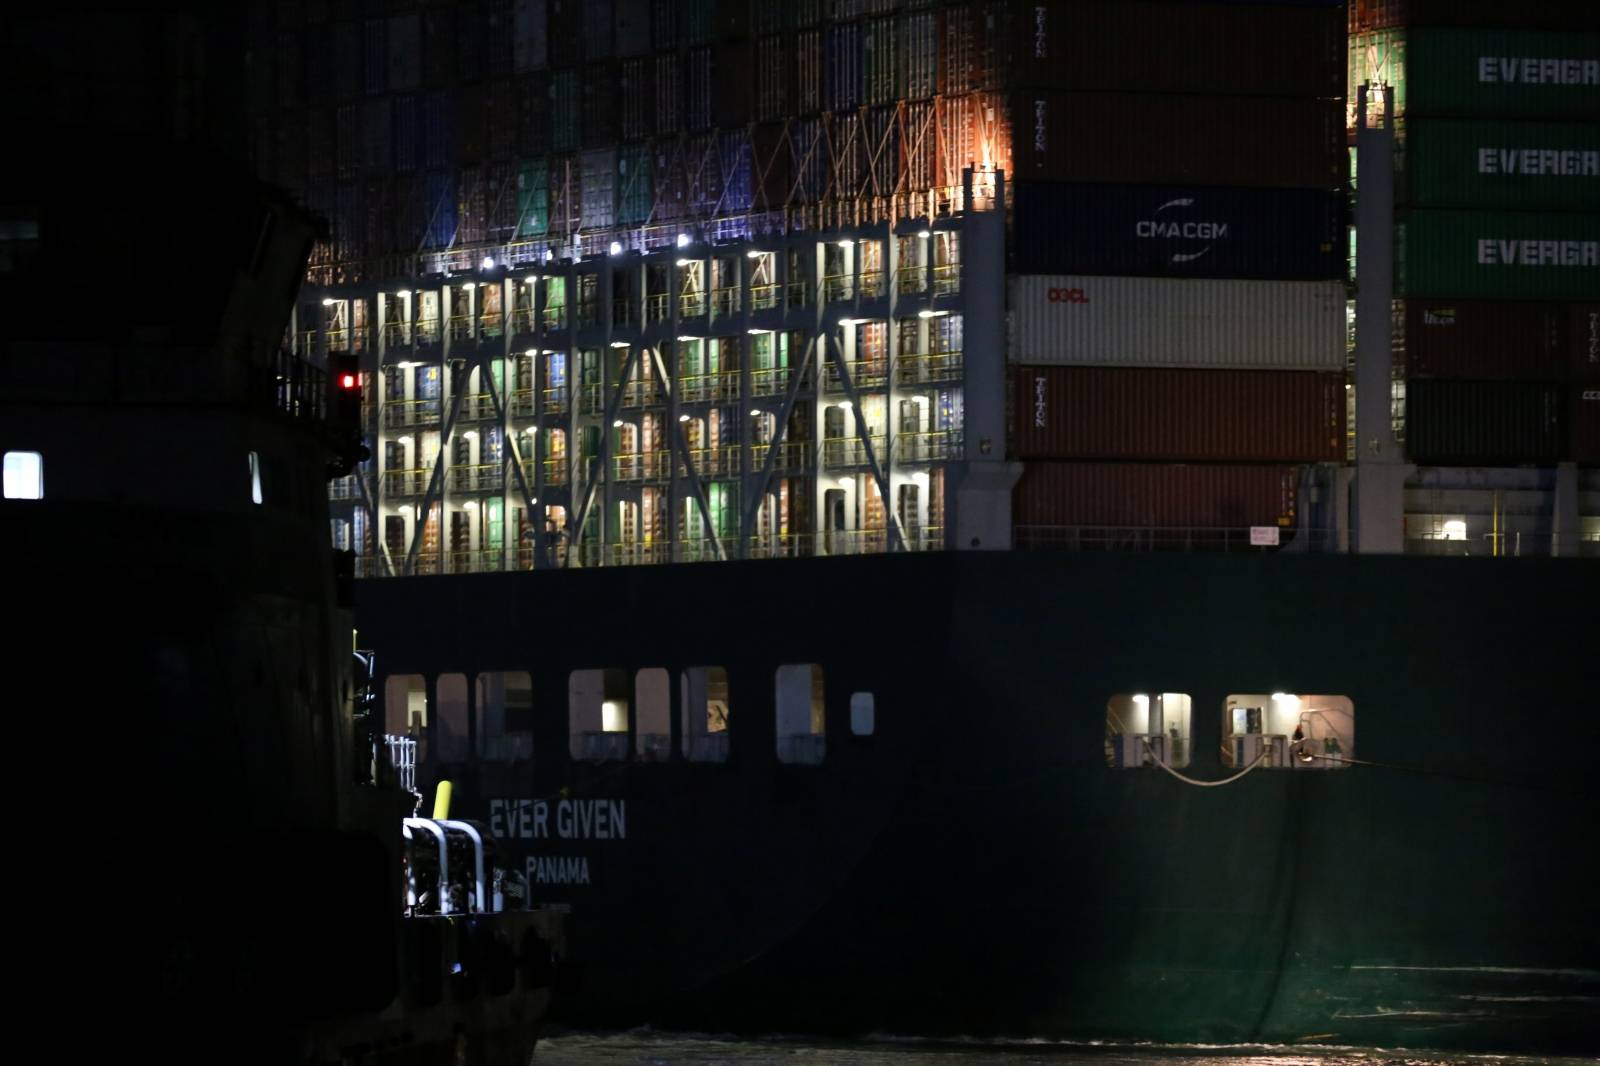 A view shows the stranded container ship Ever Given, one of the world's largest container ships, after it ran aground, in Suez Canal